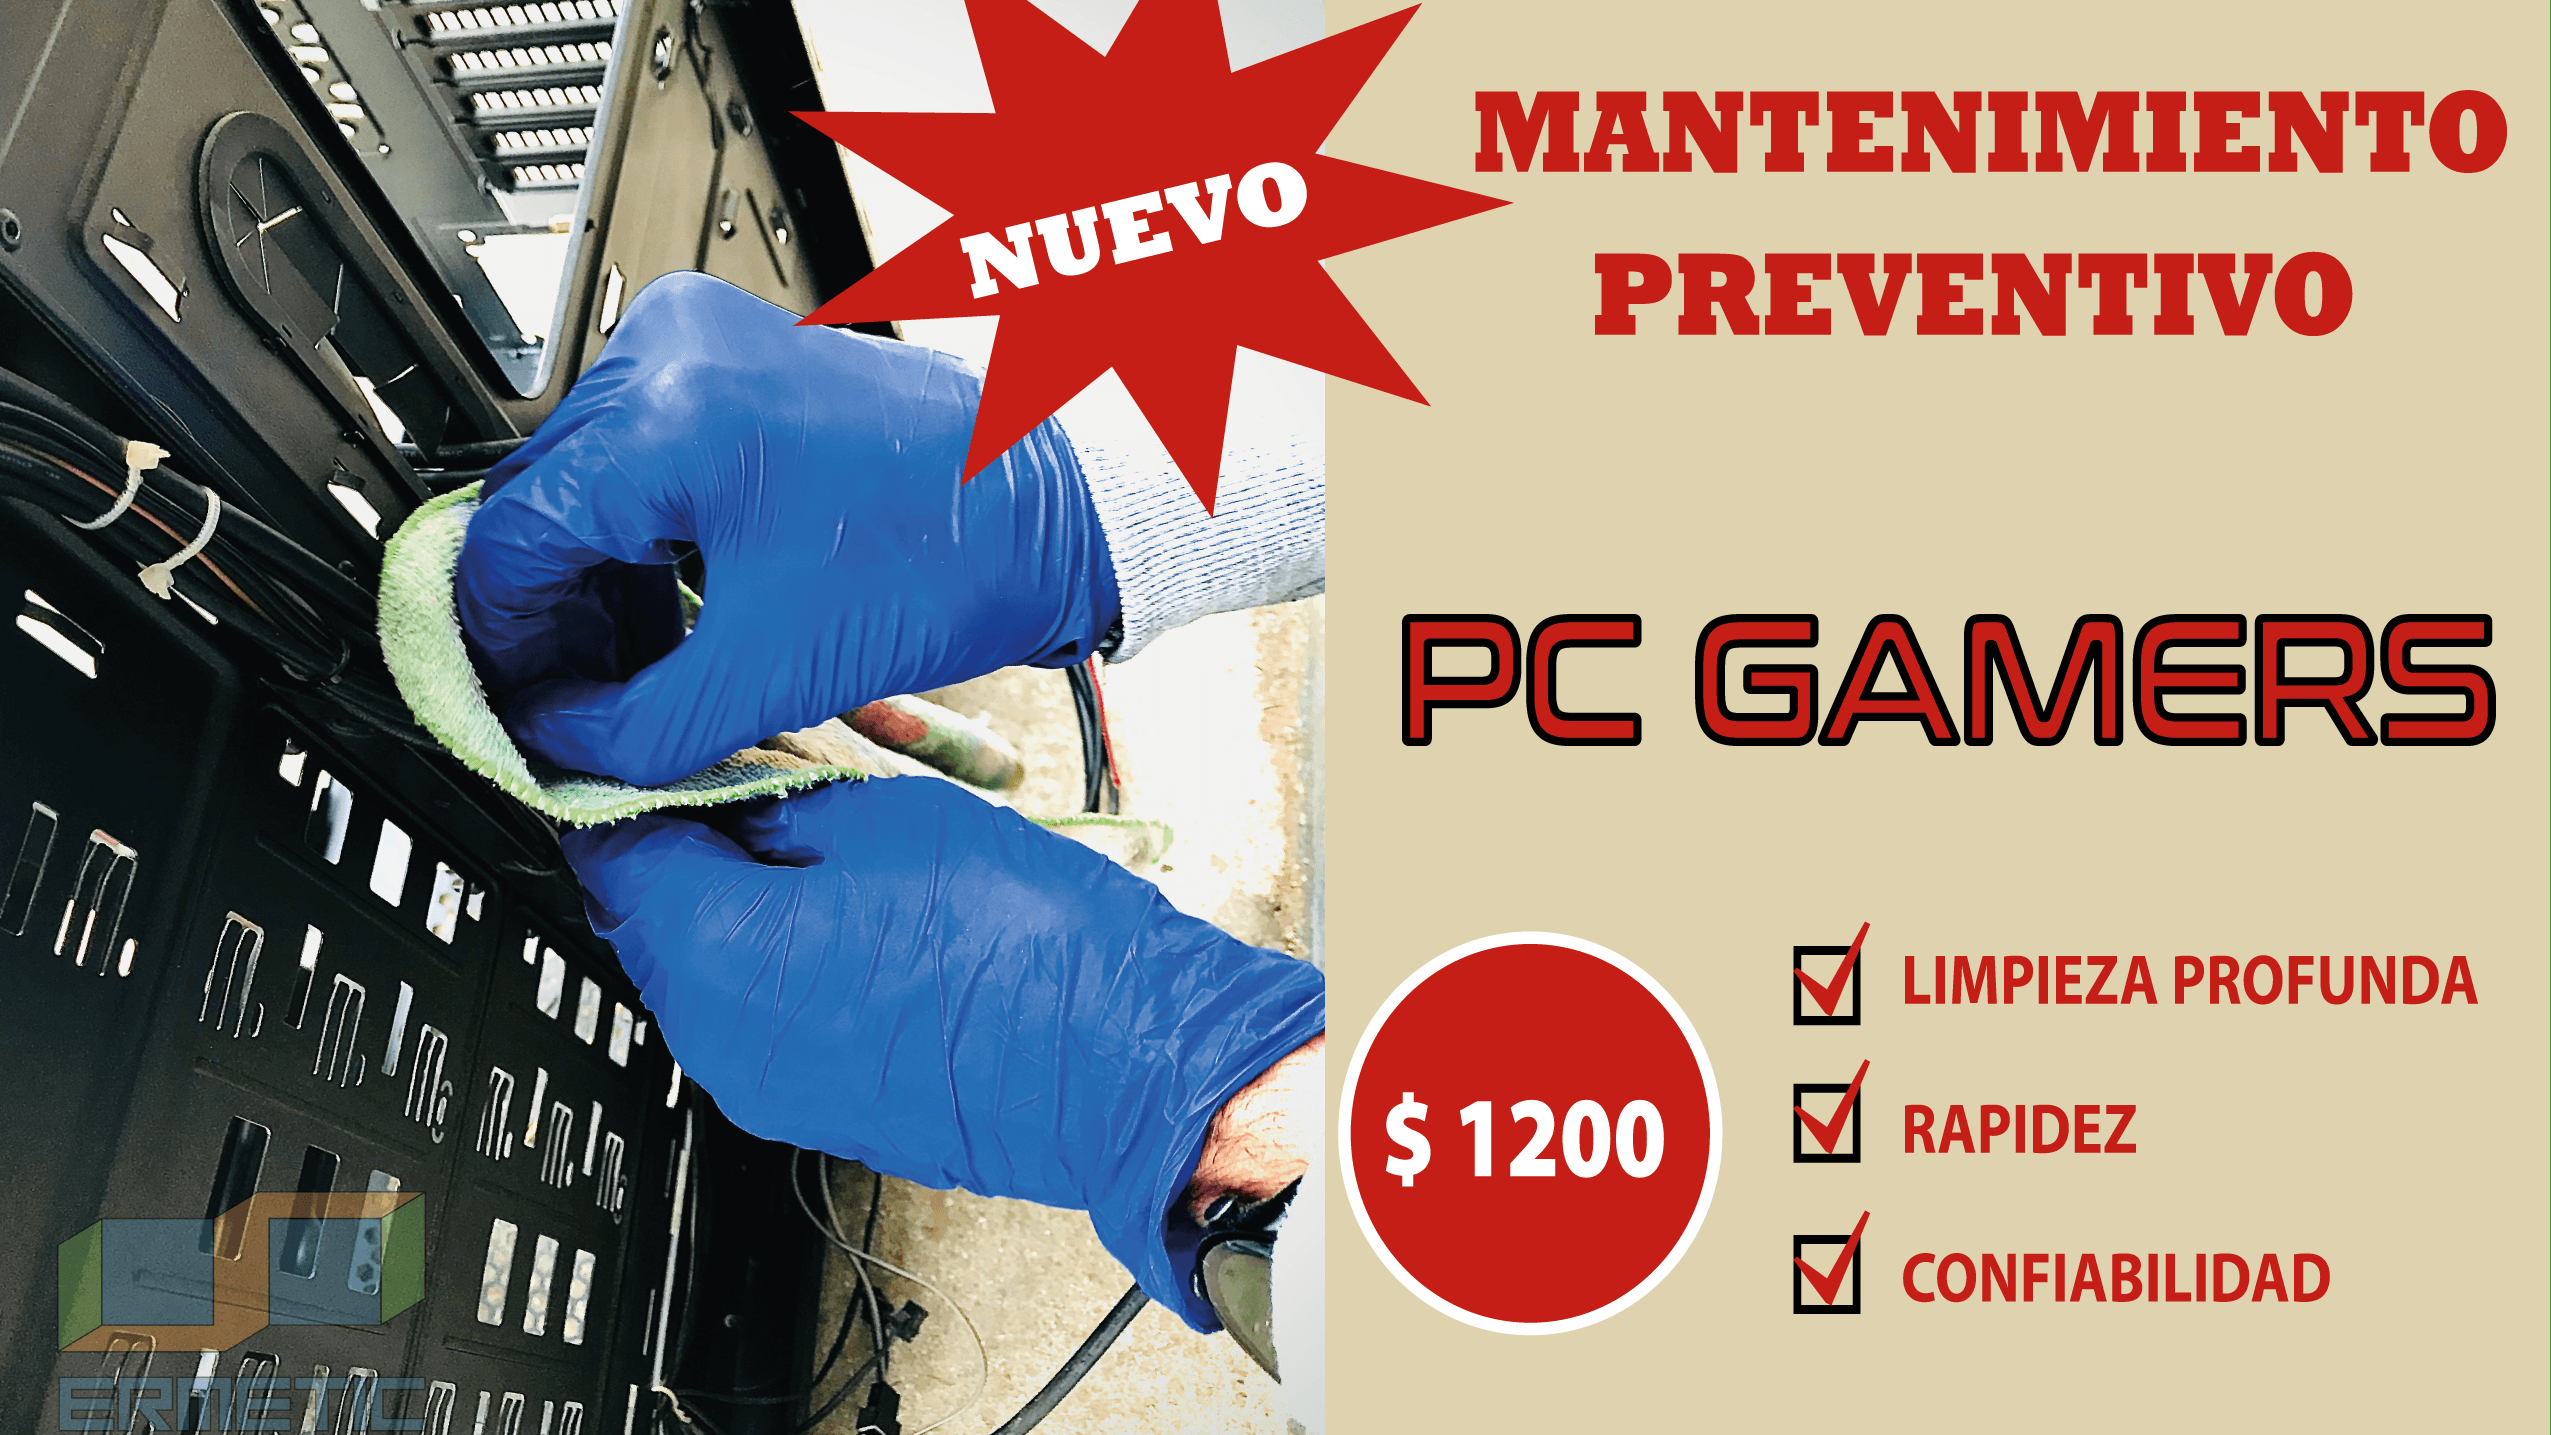 Mantenimiento pc Gamers